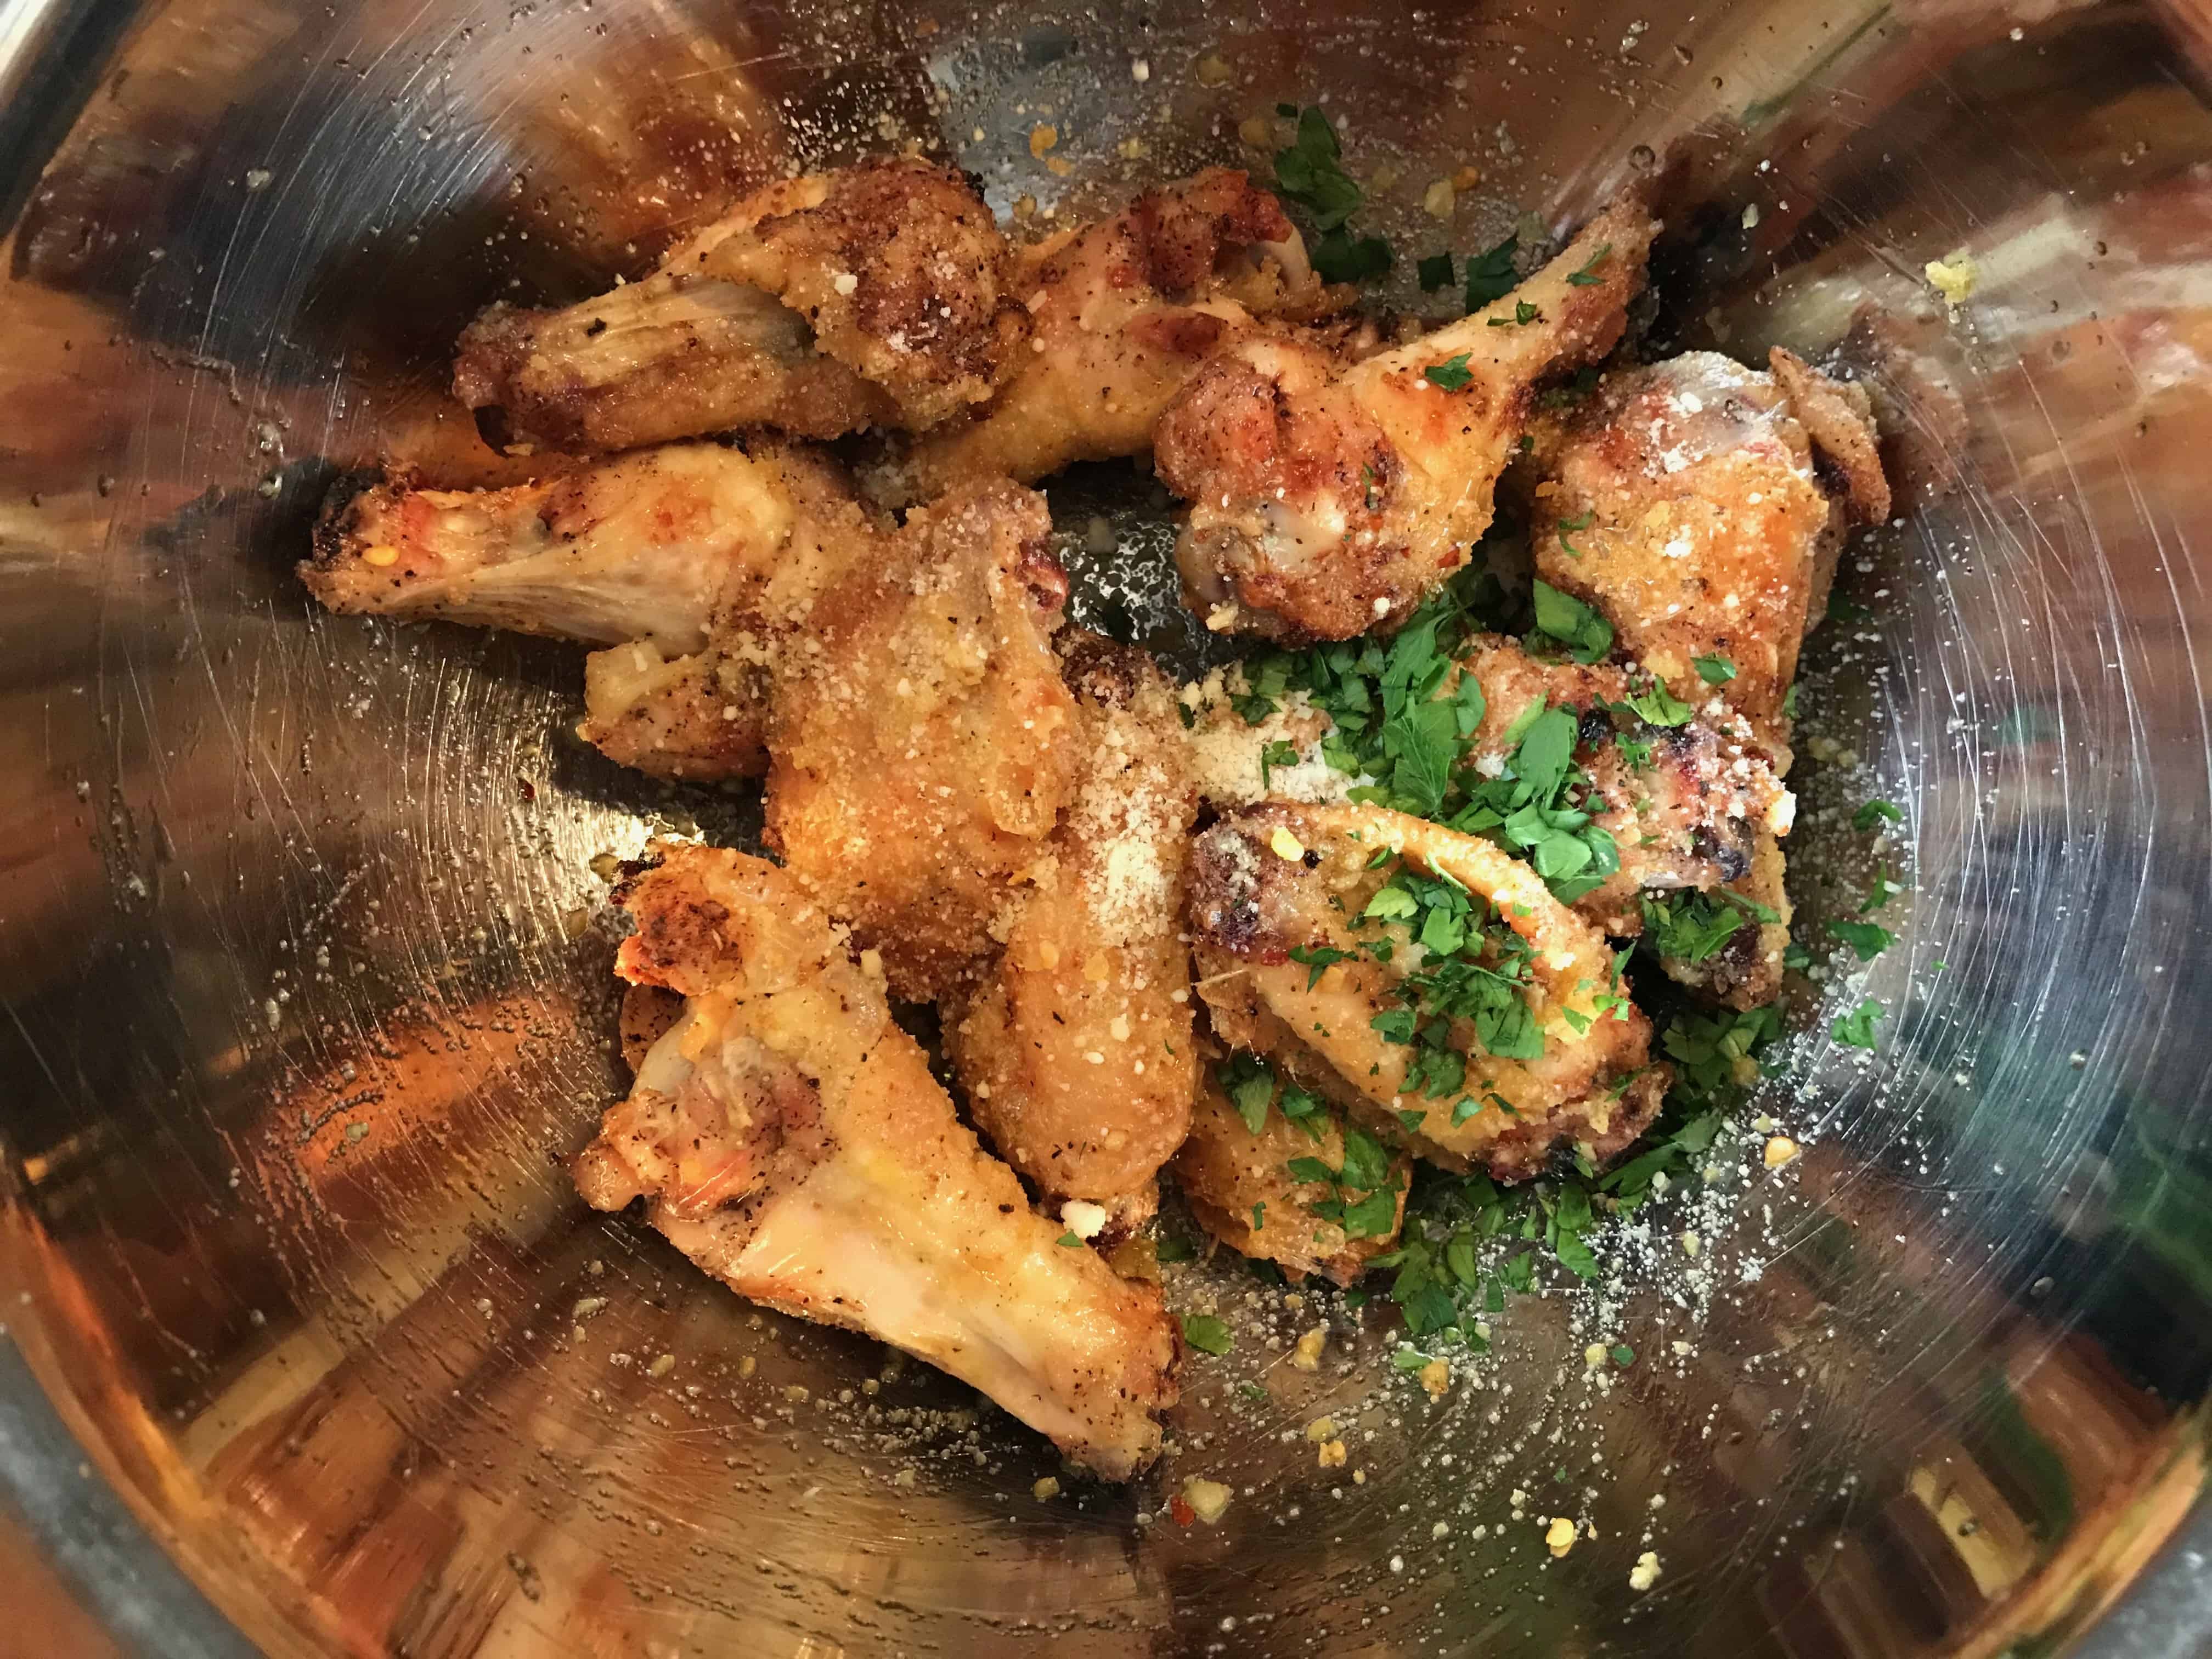 Parsley and parmesan cheese added to wings